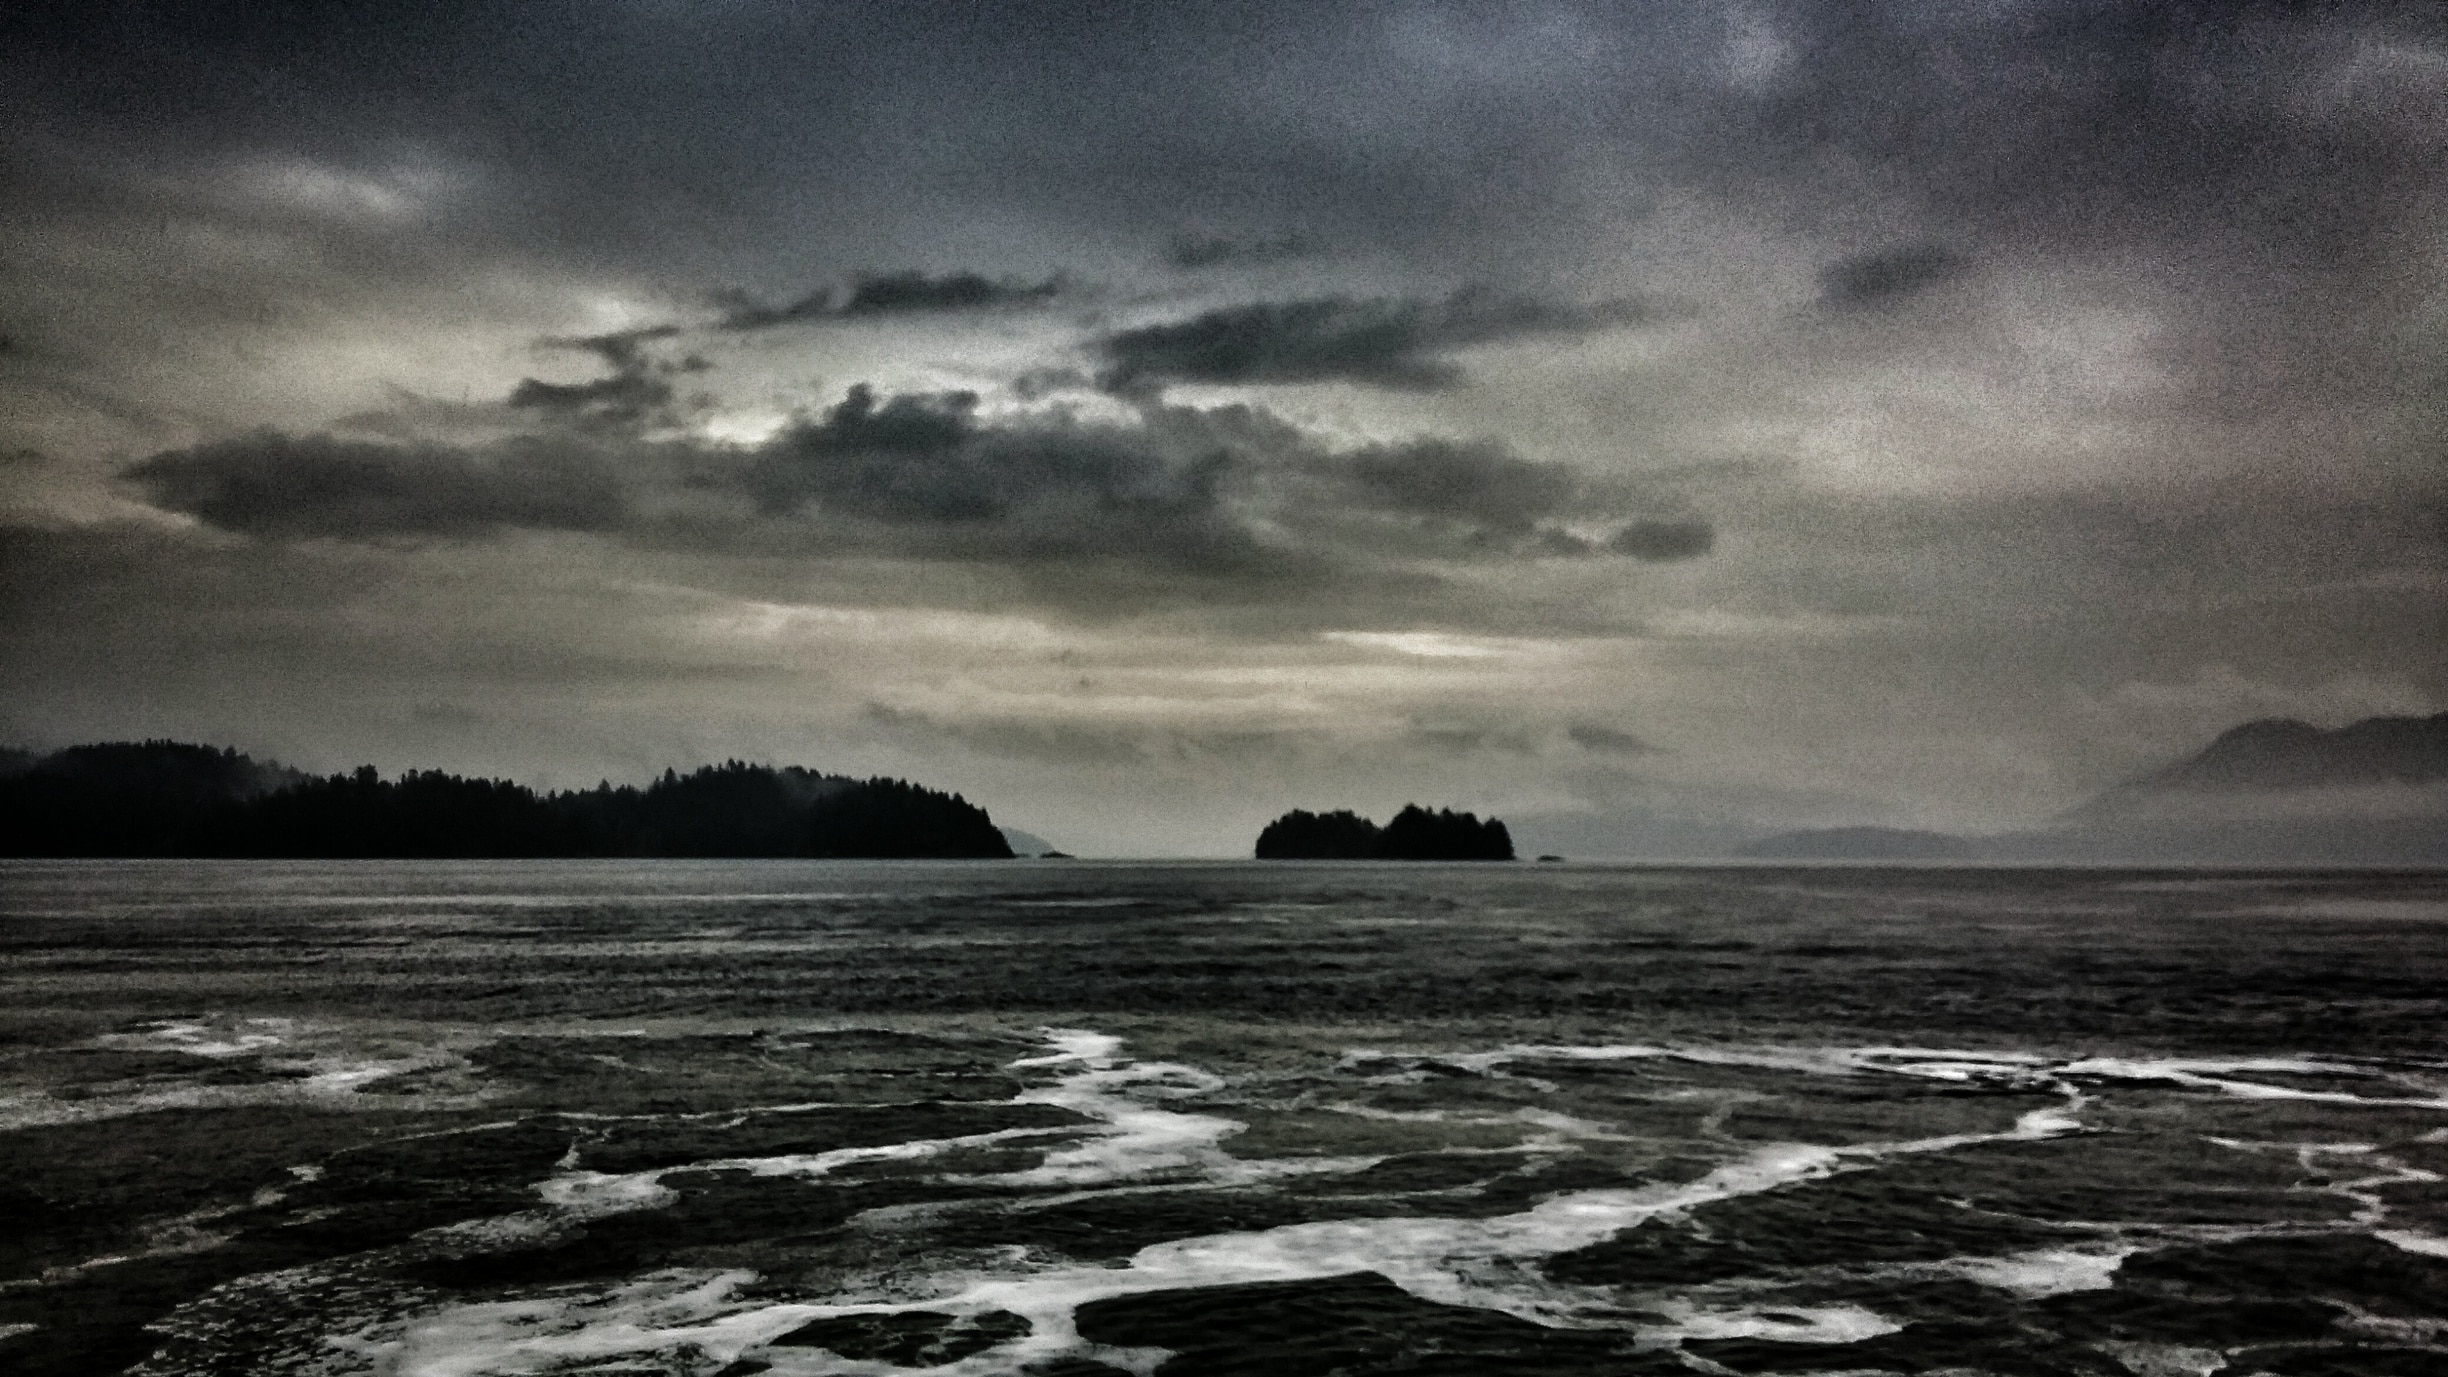 On the ferry headed to the Sunshine Coast. The view was incredible despite it being cloudy and showers.